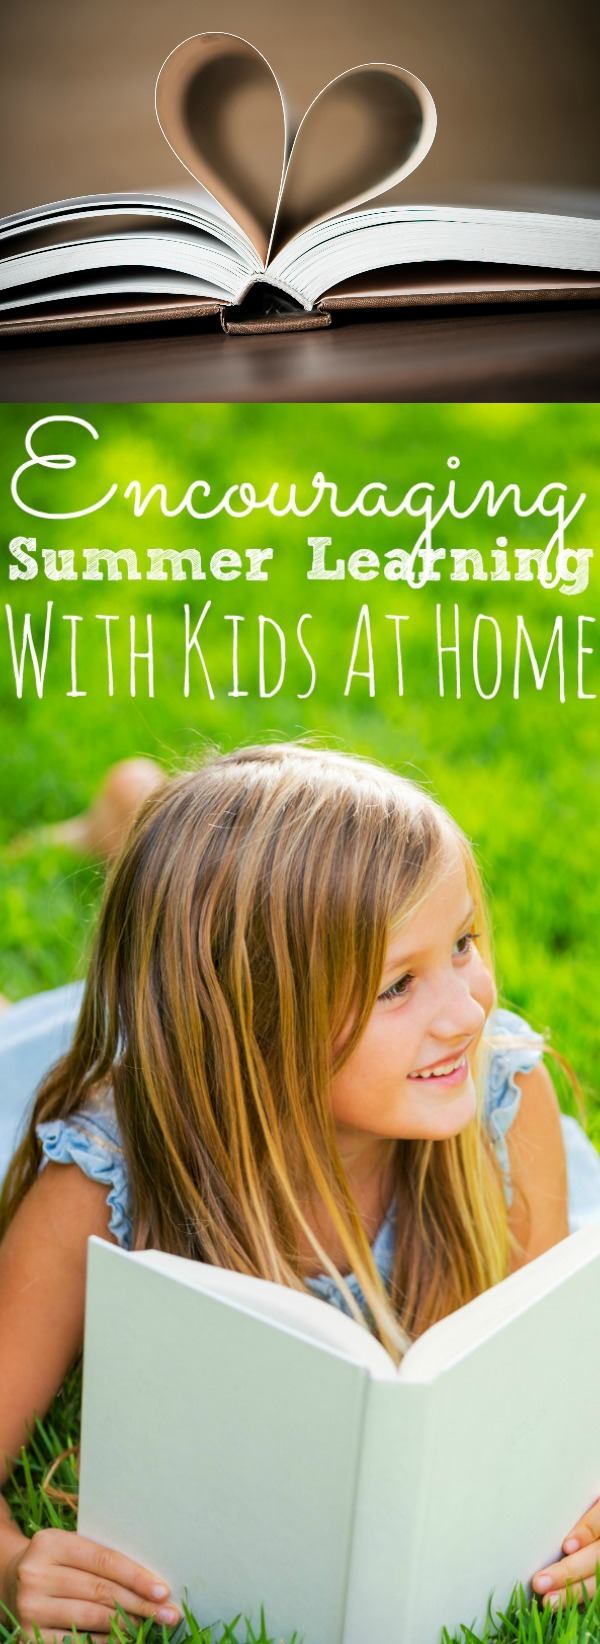 Encouraging Summer Learning With Kids at Home